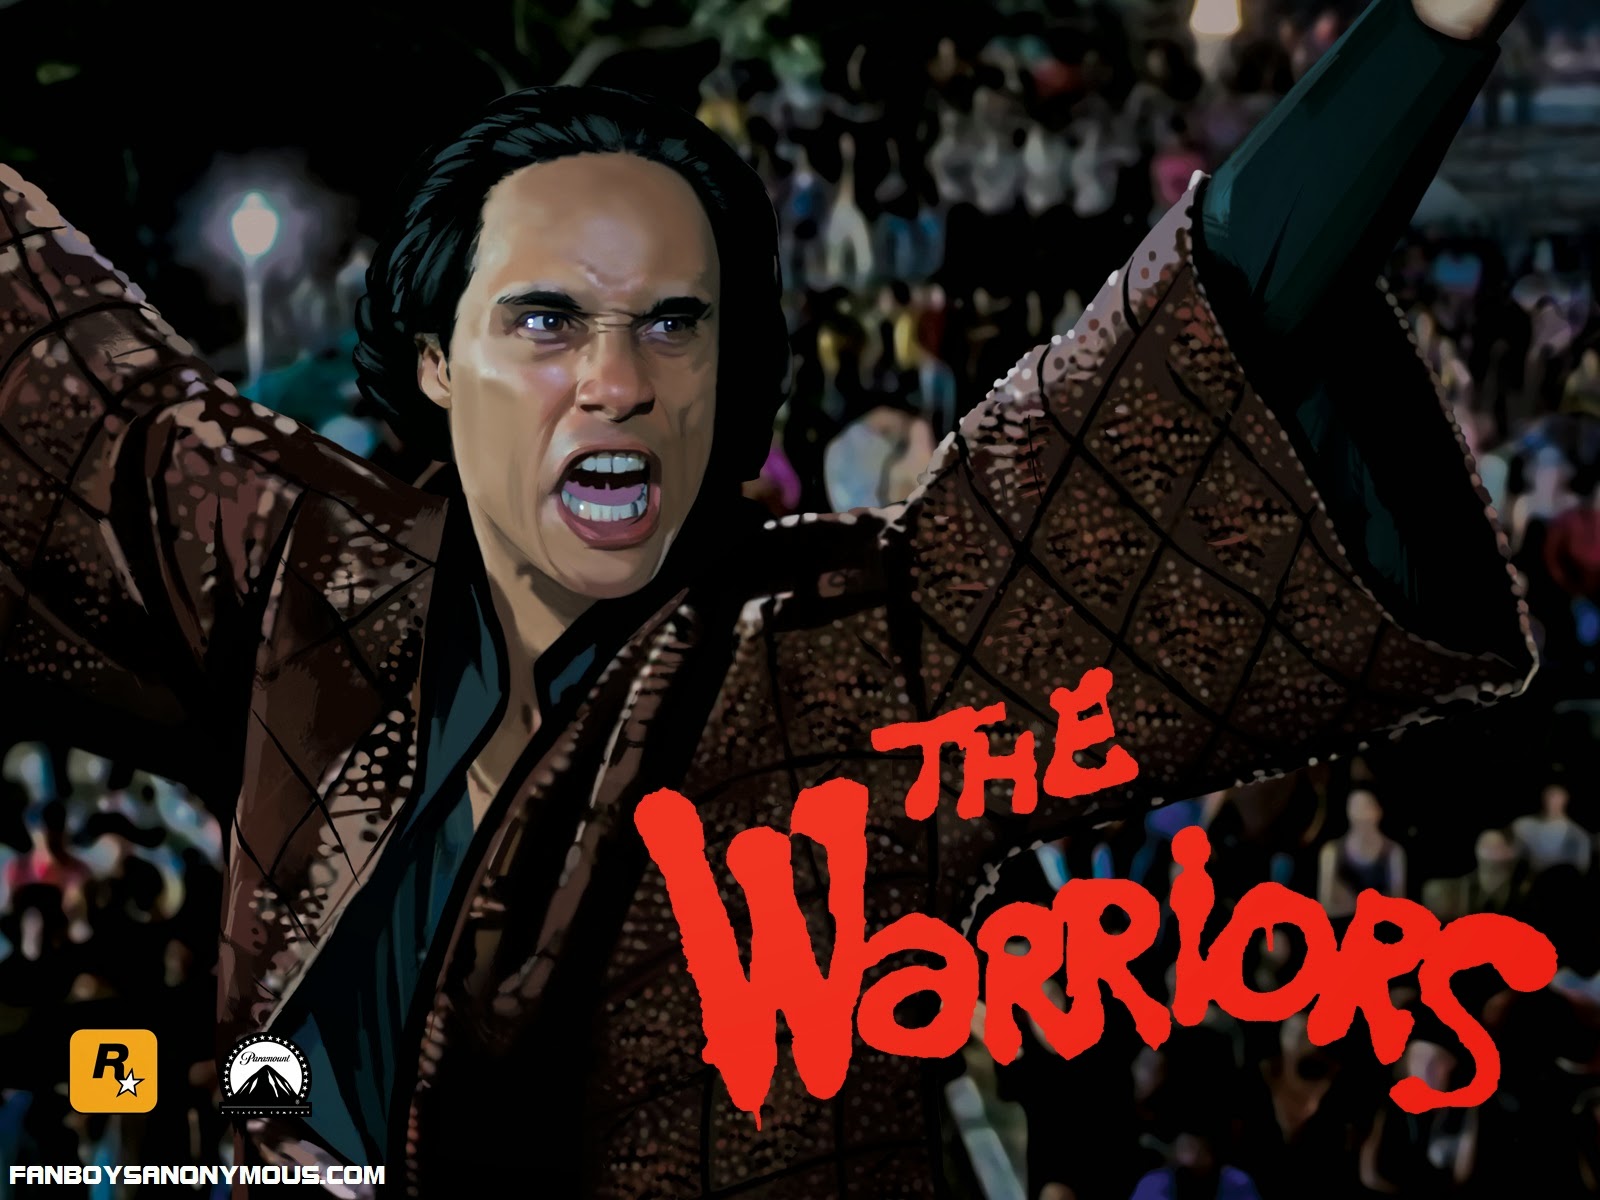 Rockstar concept and cover art for PS2 videogame The Warriors with Roger Hill as Cyrus